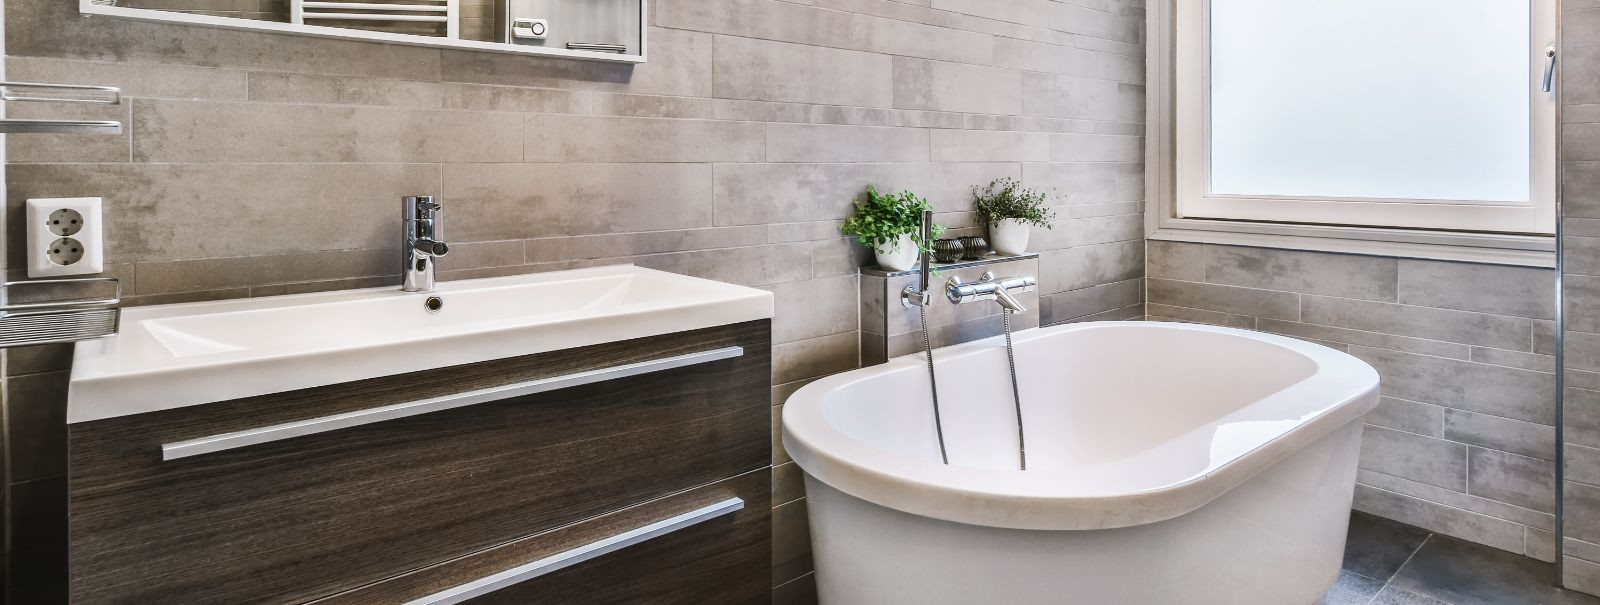 Bathroom renovations can transform a functional space into a personal sanctuary. It's not just about updating fixtures or repainting walls; it's about creating 